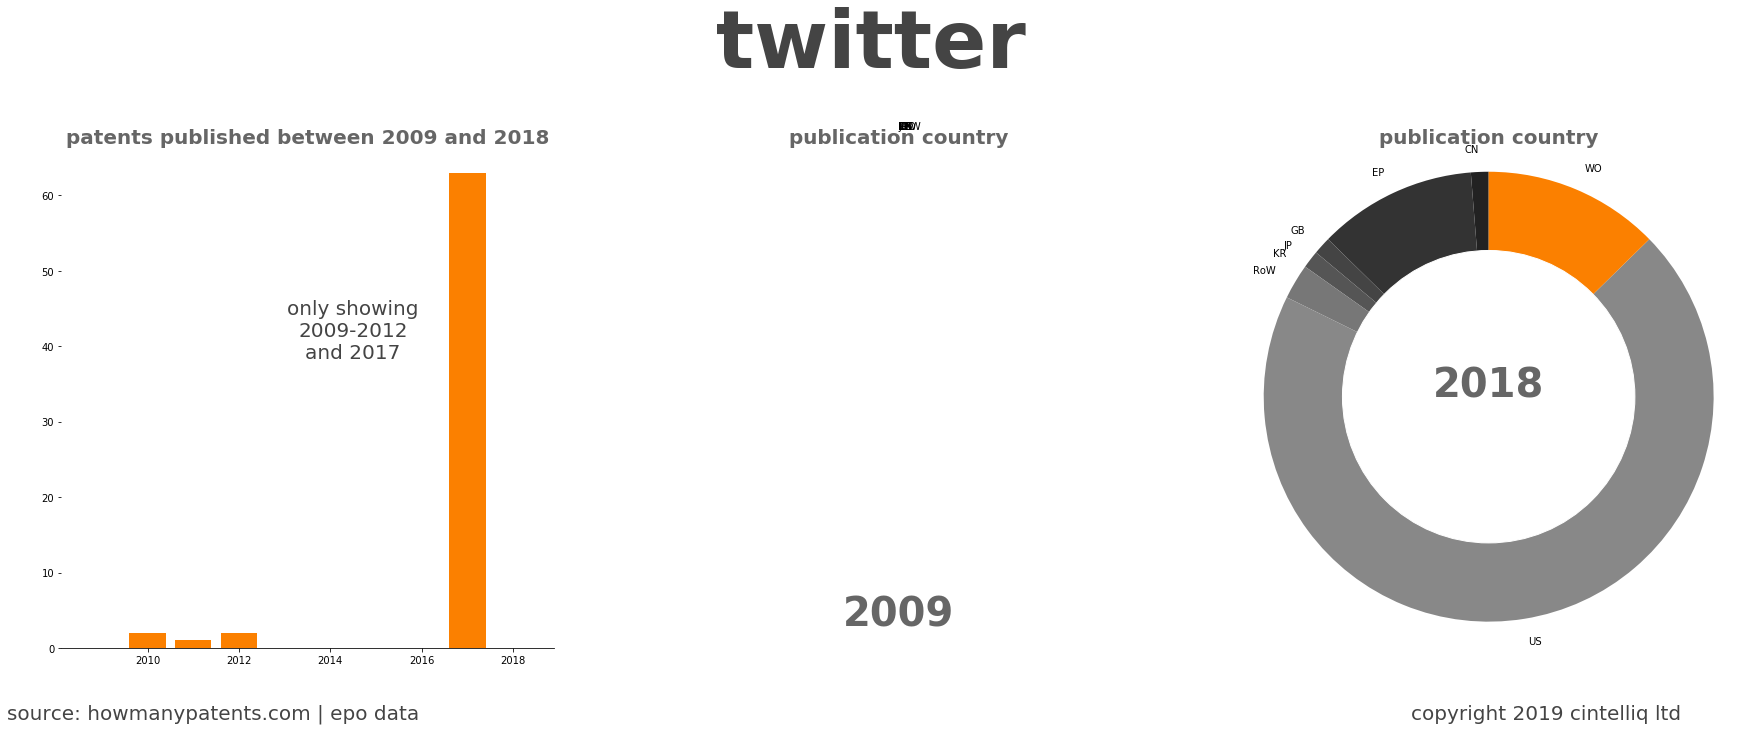 summary of patents for Twitter